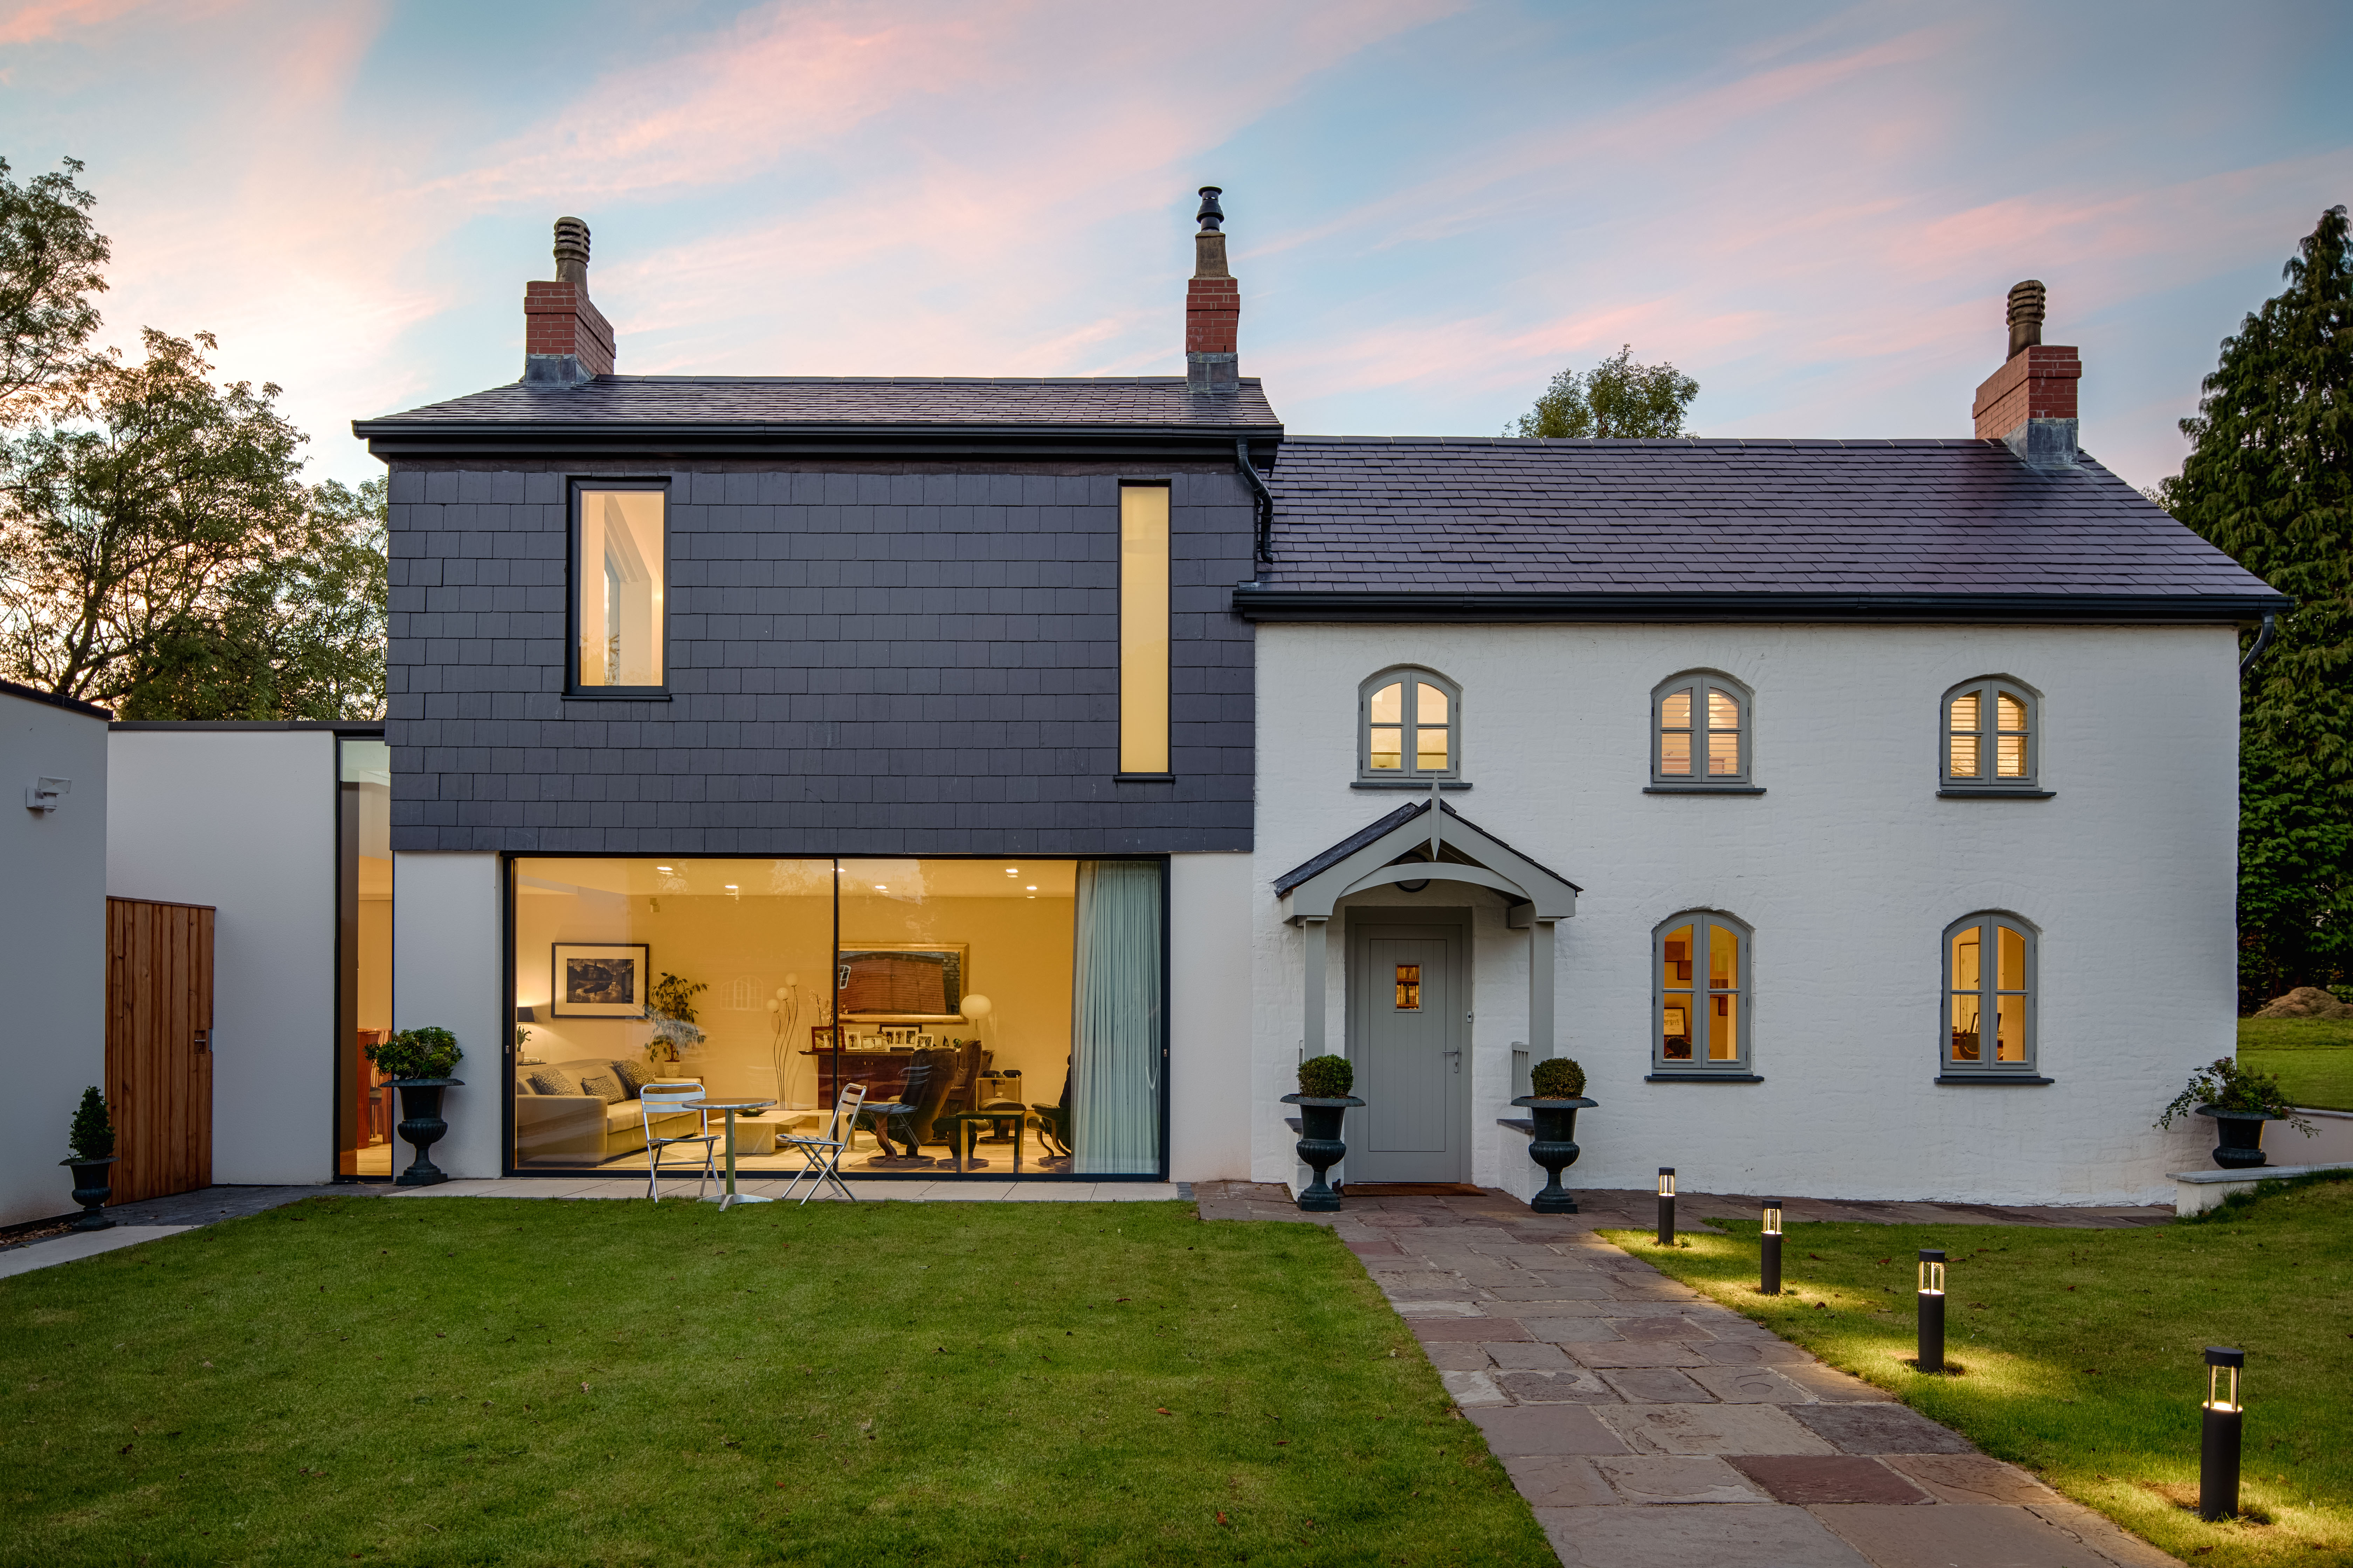 </p> <p>Find your ideal home design pro on designfor-me.com - get matched and see who's interested in your home project. Click image to see more inspiration from our design pros</p> <p>Design by james, architect from Cardiff</p> <p>#architecture #homedesign #modernhomes #homeinspiration #extensions #extensiondesign #extensioninspiration #extensionideas #houseextension #slidingdoors </p> <p>